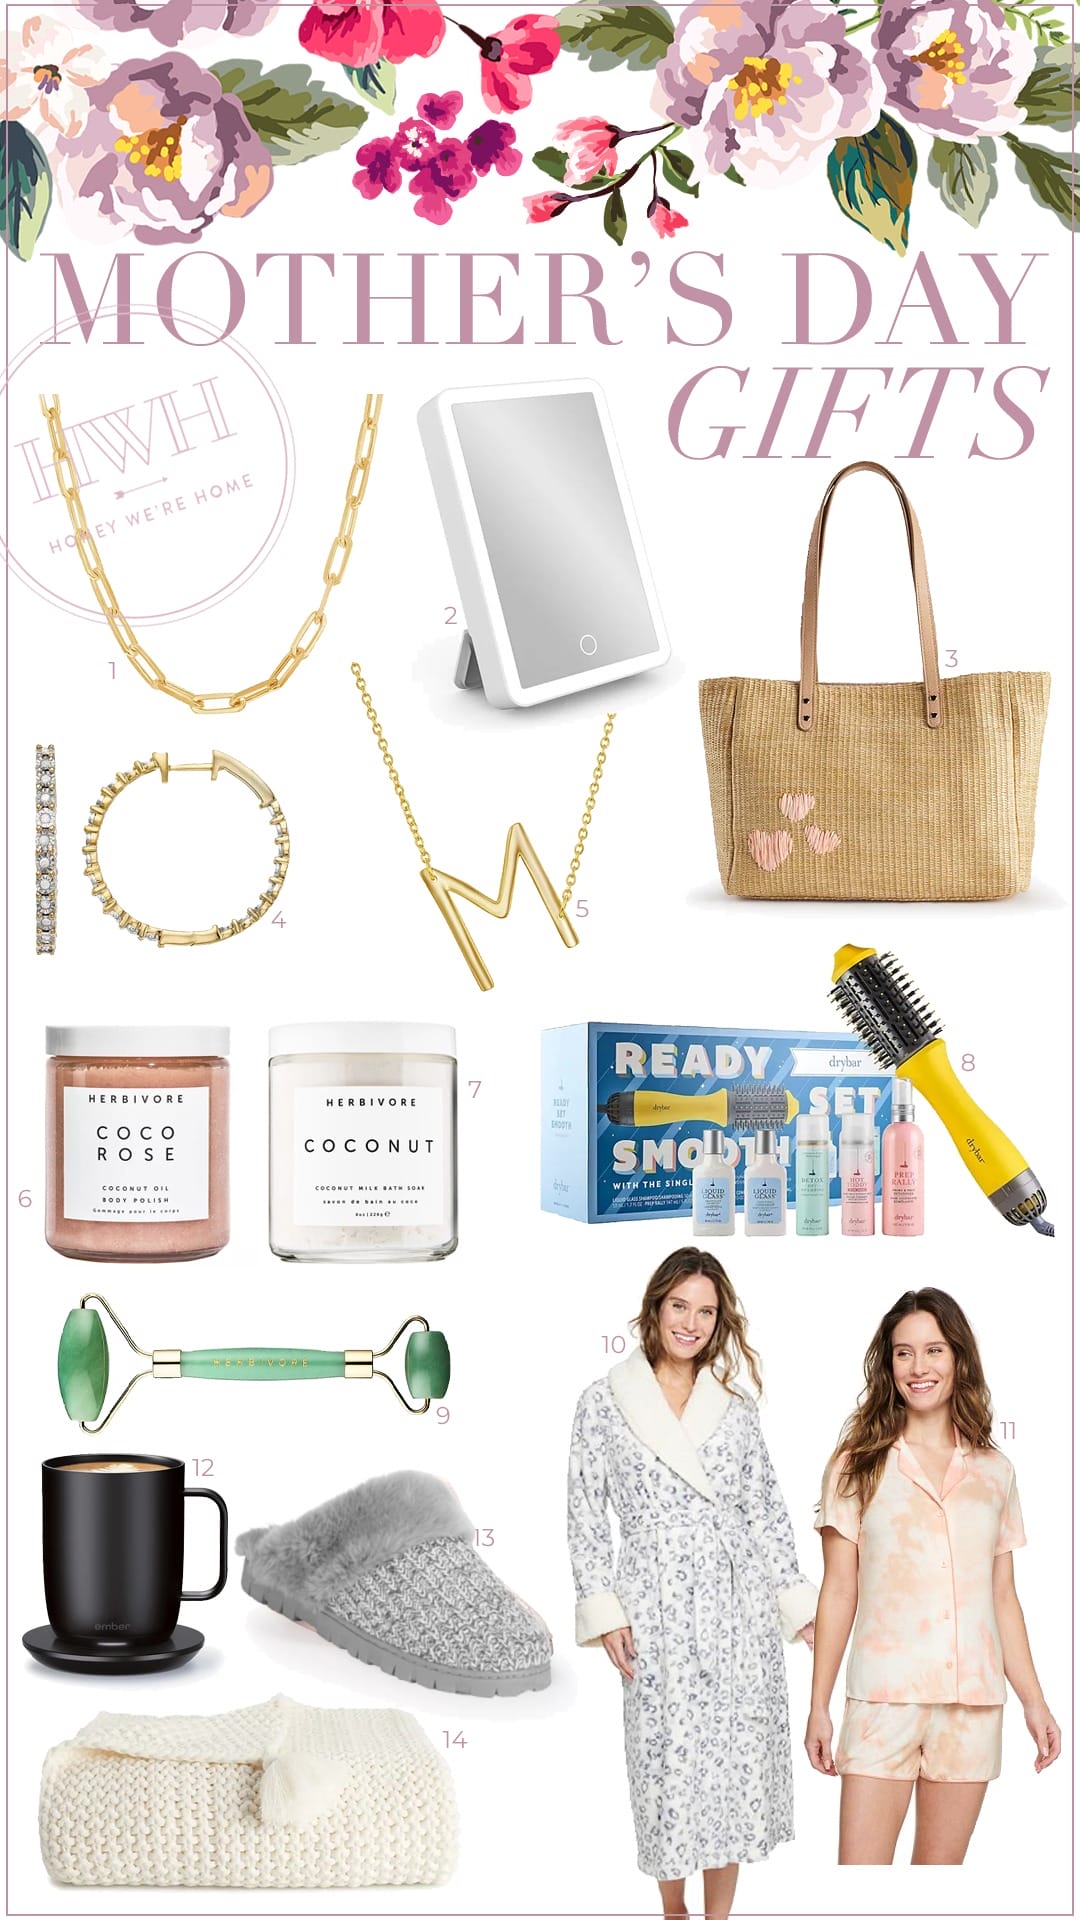 20 Last-Minute Mother's Day Gift Ideas - The Budget Diet